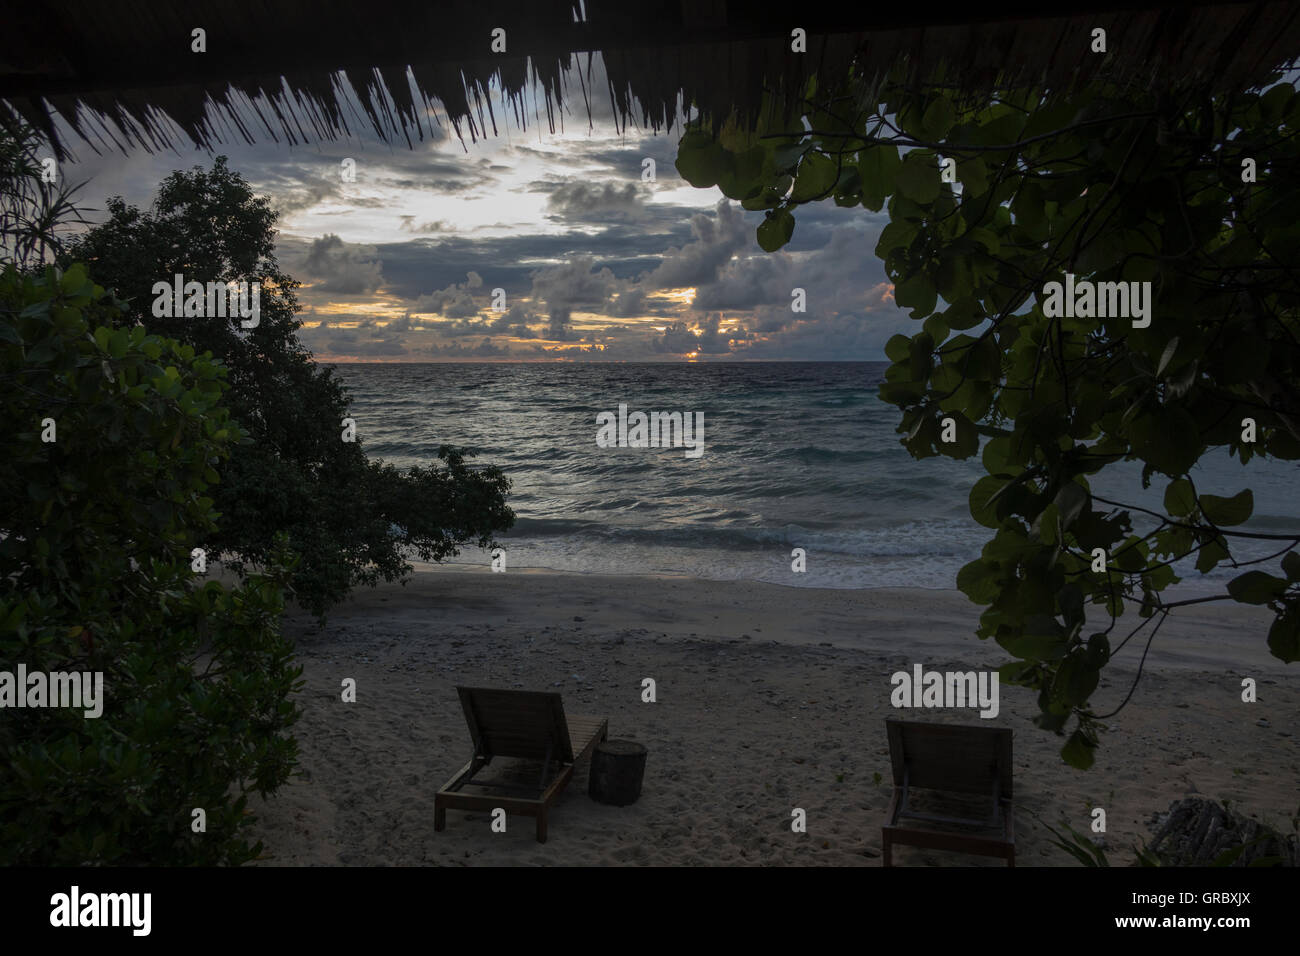 Evening Twilight At The Ocean, Sandy Beach With Deckchairs, Vegetation. Selayar, South Sulawesi, Indonesia Stock Photo